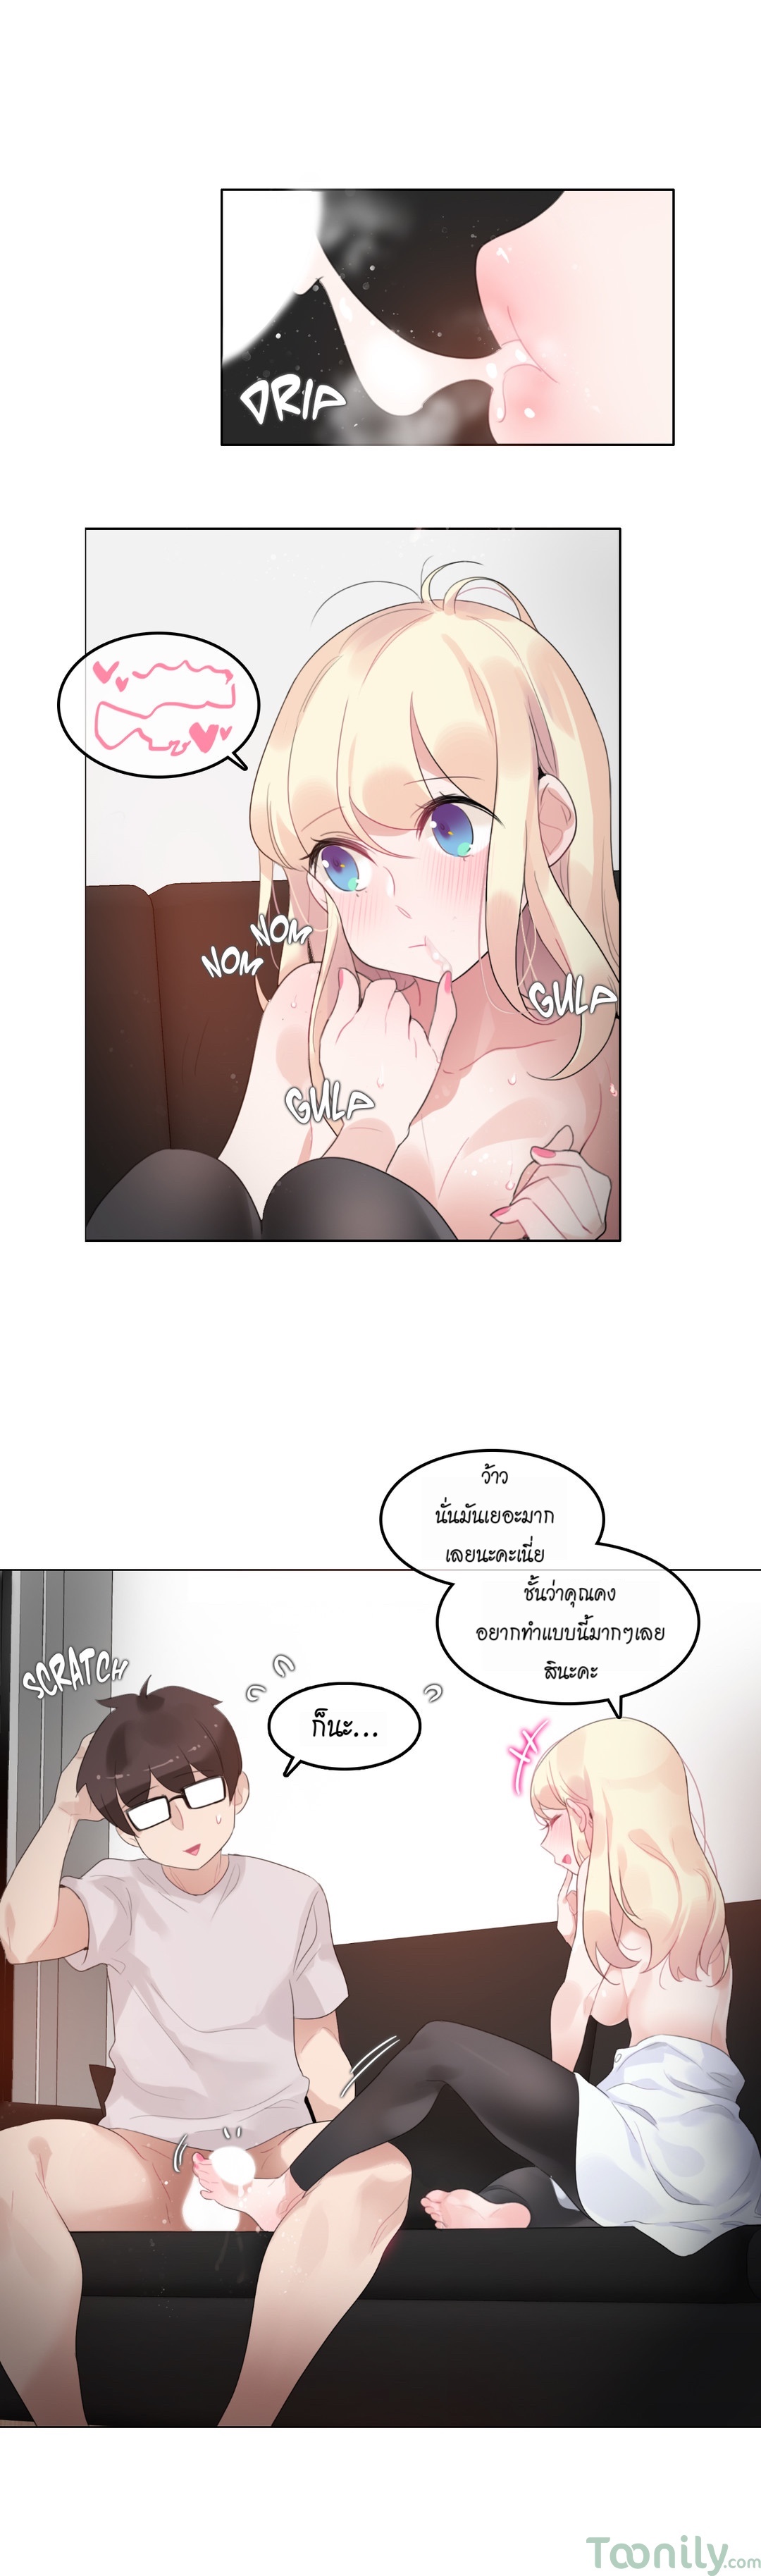 A Pervert’s Daily Life59 (17)